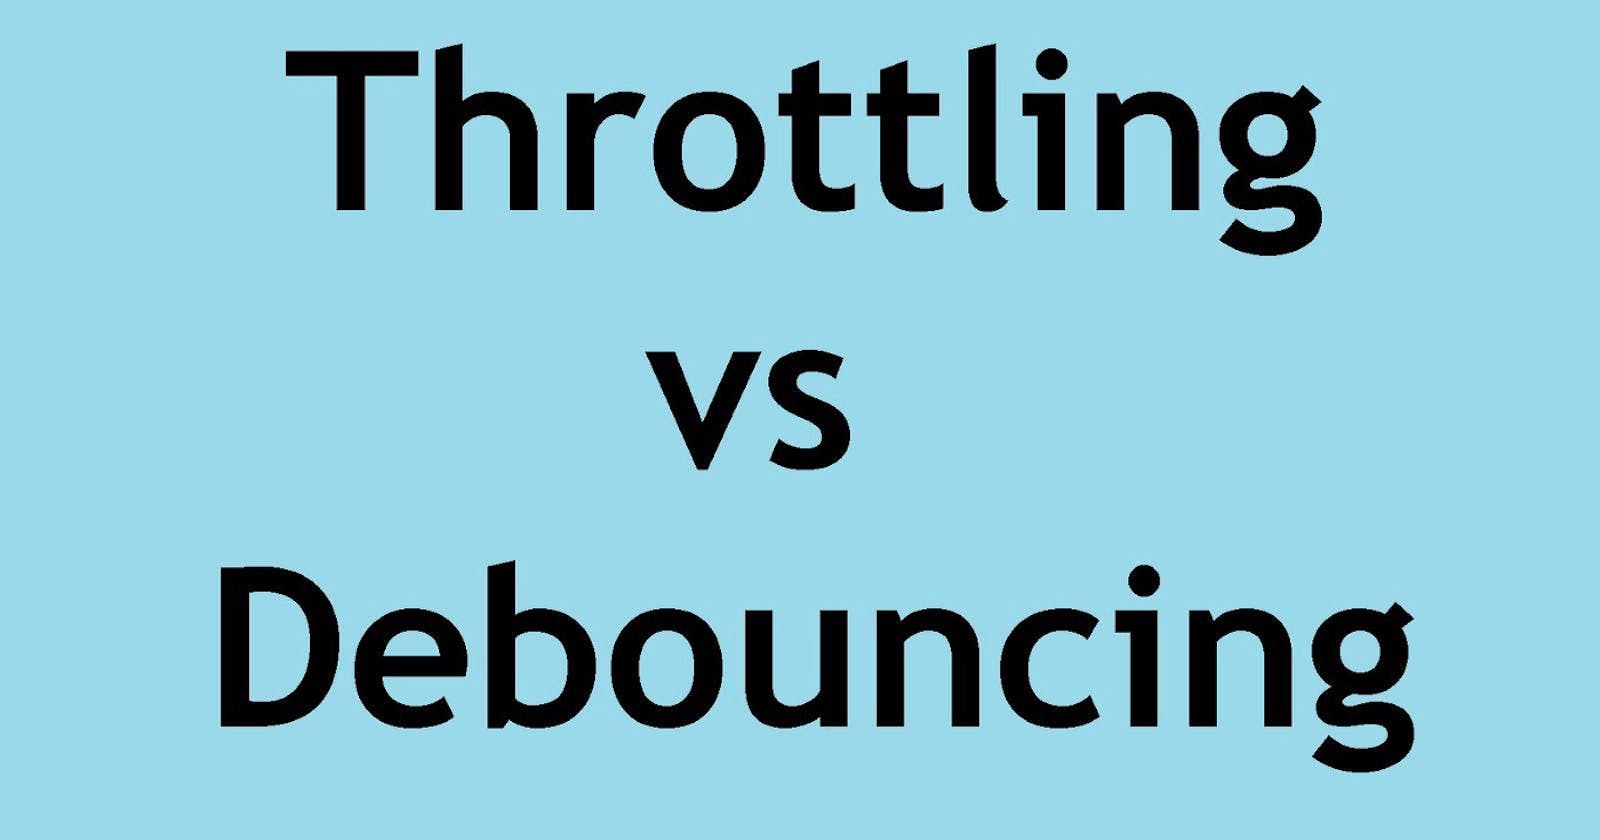 Understand Debouncing and Throttling in javascript with examples